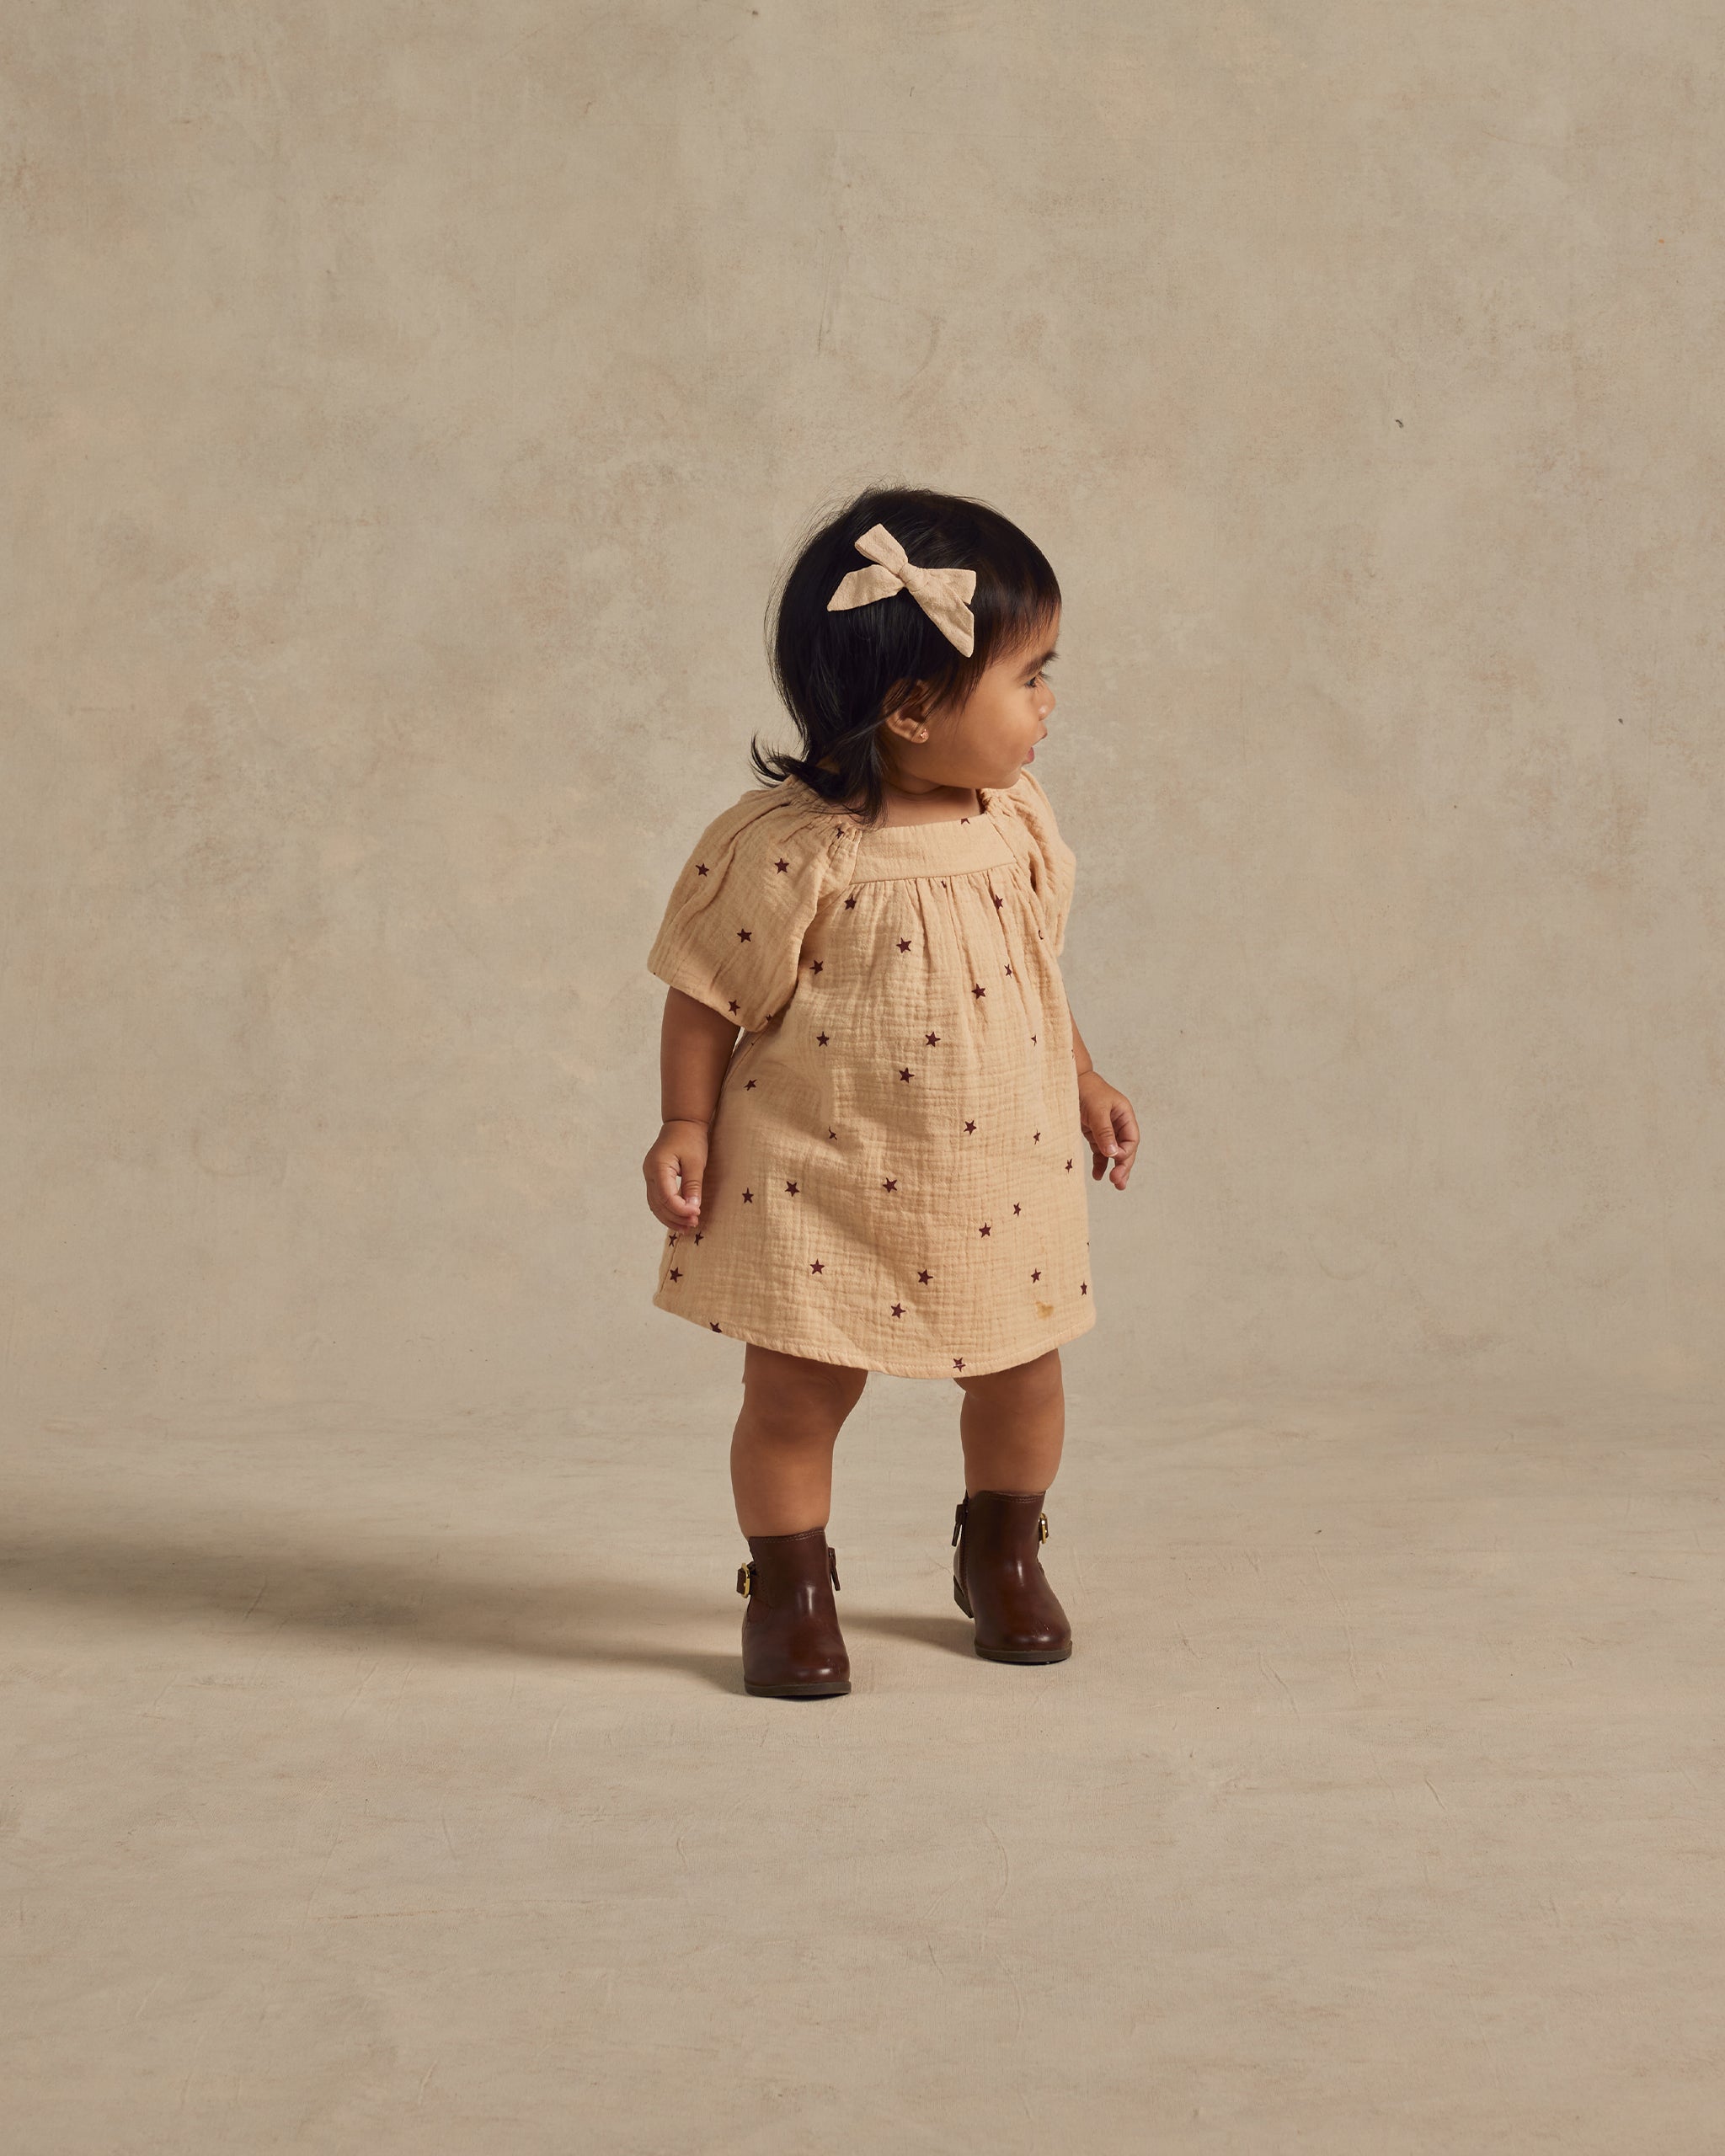 Talee Dress || Stars - Rylee + Cru | Kids Clothes | Trendy Baby Clothes | Modern Infant Outfits |